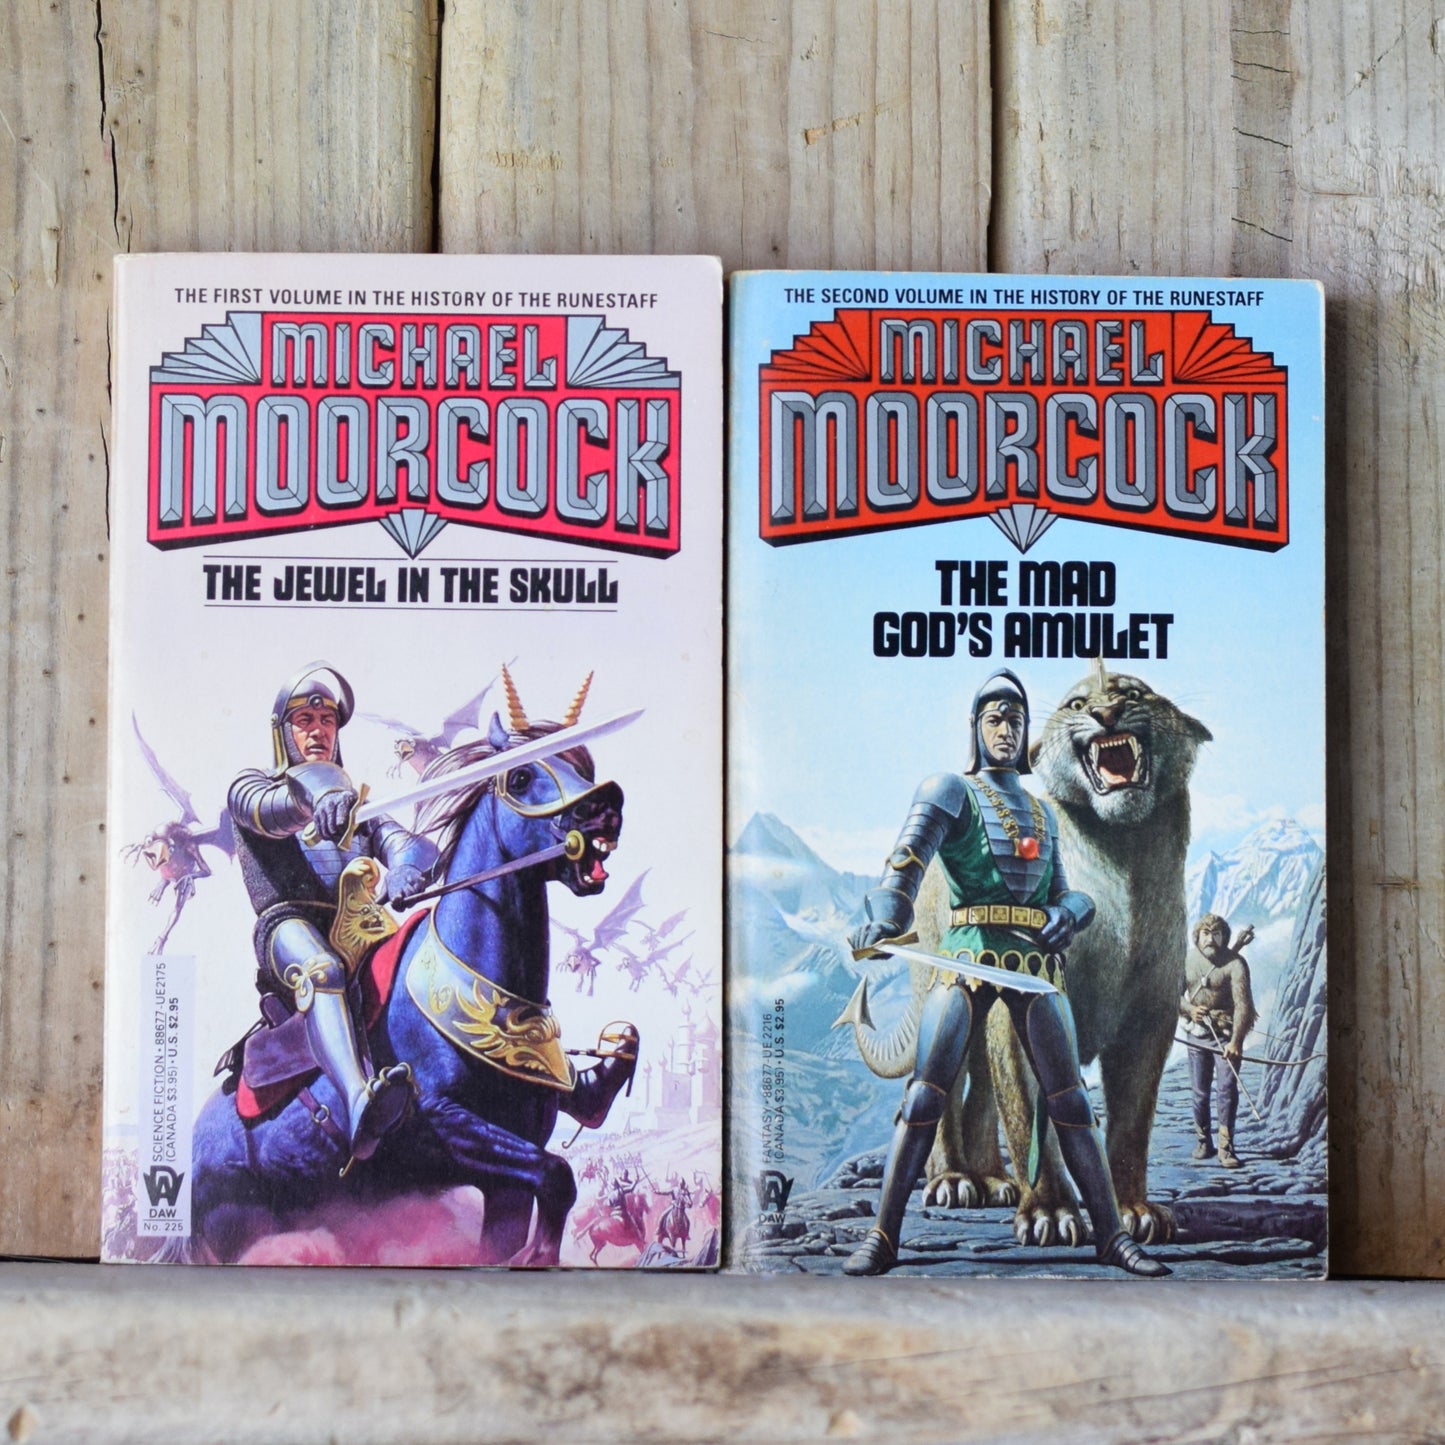 Vintage Fantasy Paperback: Michael Moorcock - The History of the Runestaff, Vols 1 & 2 - The Jewel in the Skull & The Mad God's Amulet